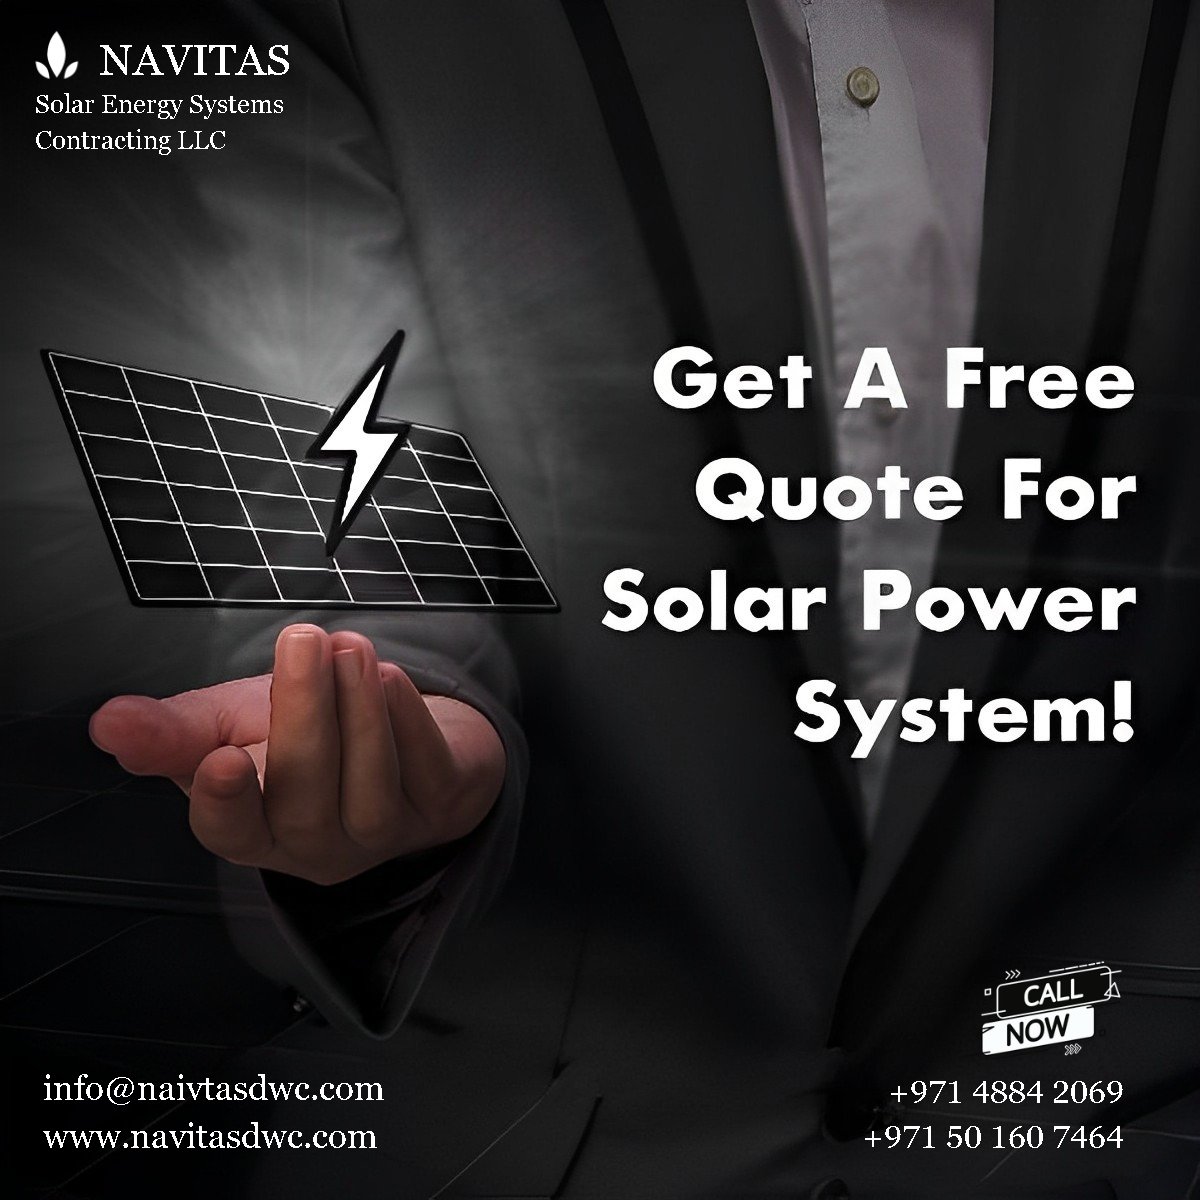 Get a Free Quote for Solar power system.

A Solar revolution by @navitasuae 

It’s time to go solar, it’s time for  #Navitassolar 
#SolarUAE#ShamsInitiative #DEWA #solarpanels #solarpower #solarenergy #solartechnology #SolarContracting # #solar #renewableEnergy #greenenergy